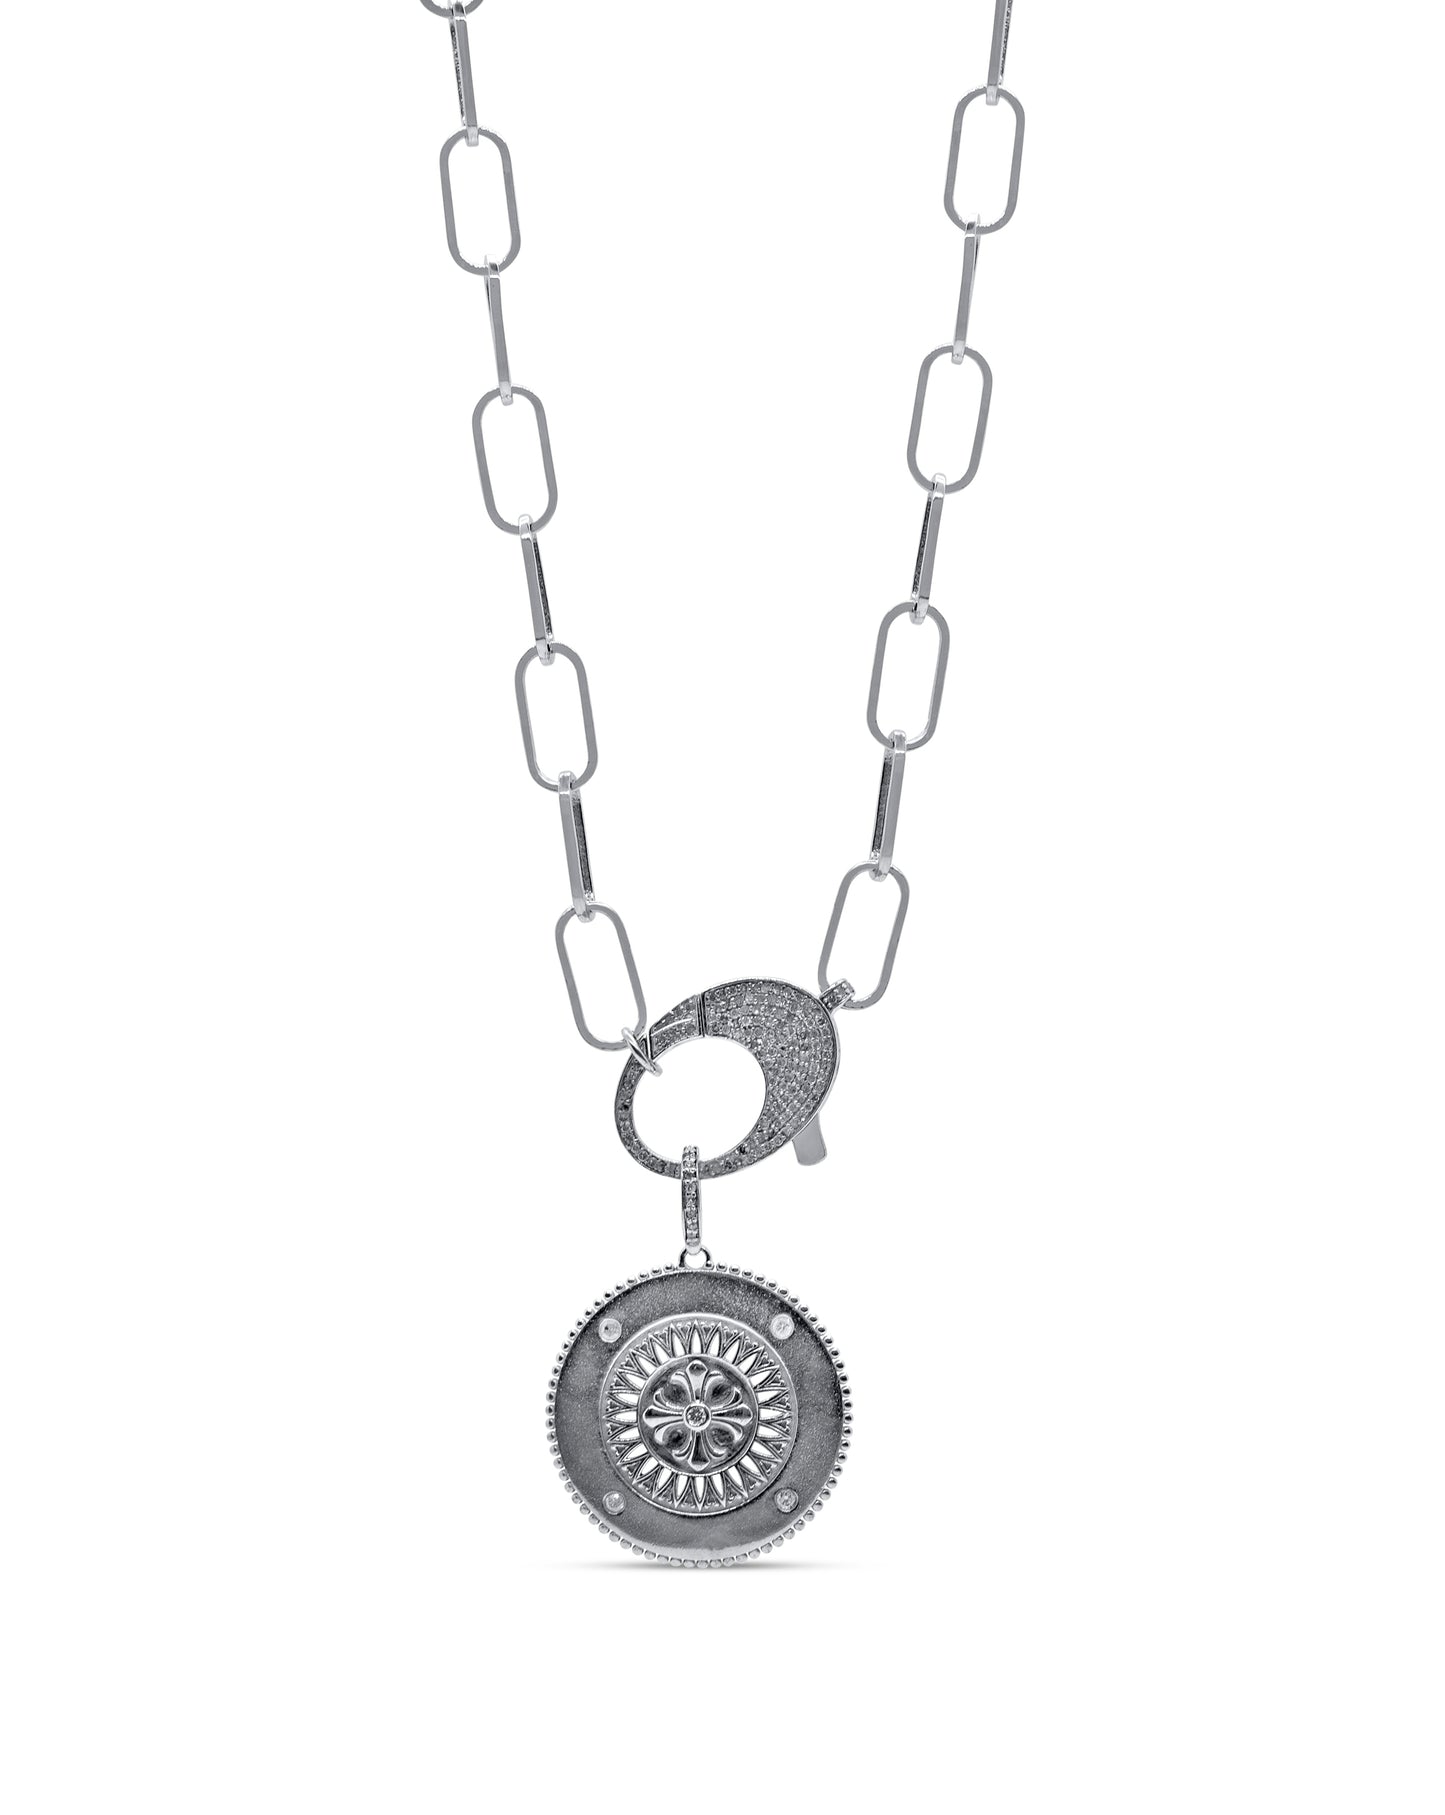 Talisman line necklace in white gold